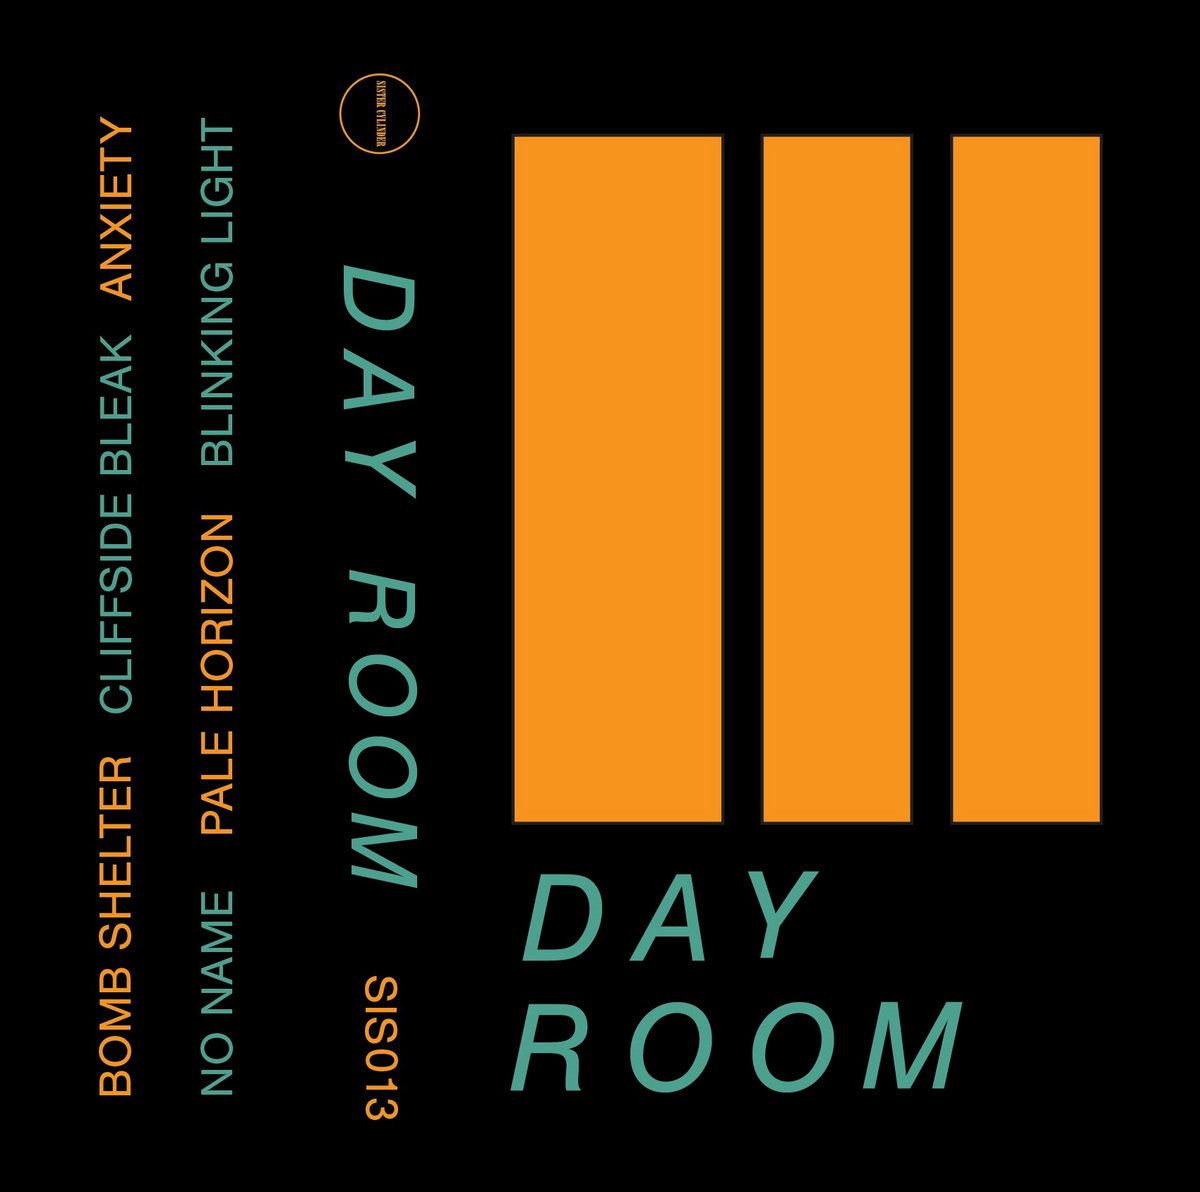 DAY ROOM is the perfect Post-Punk escape